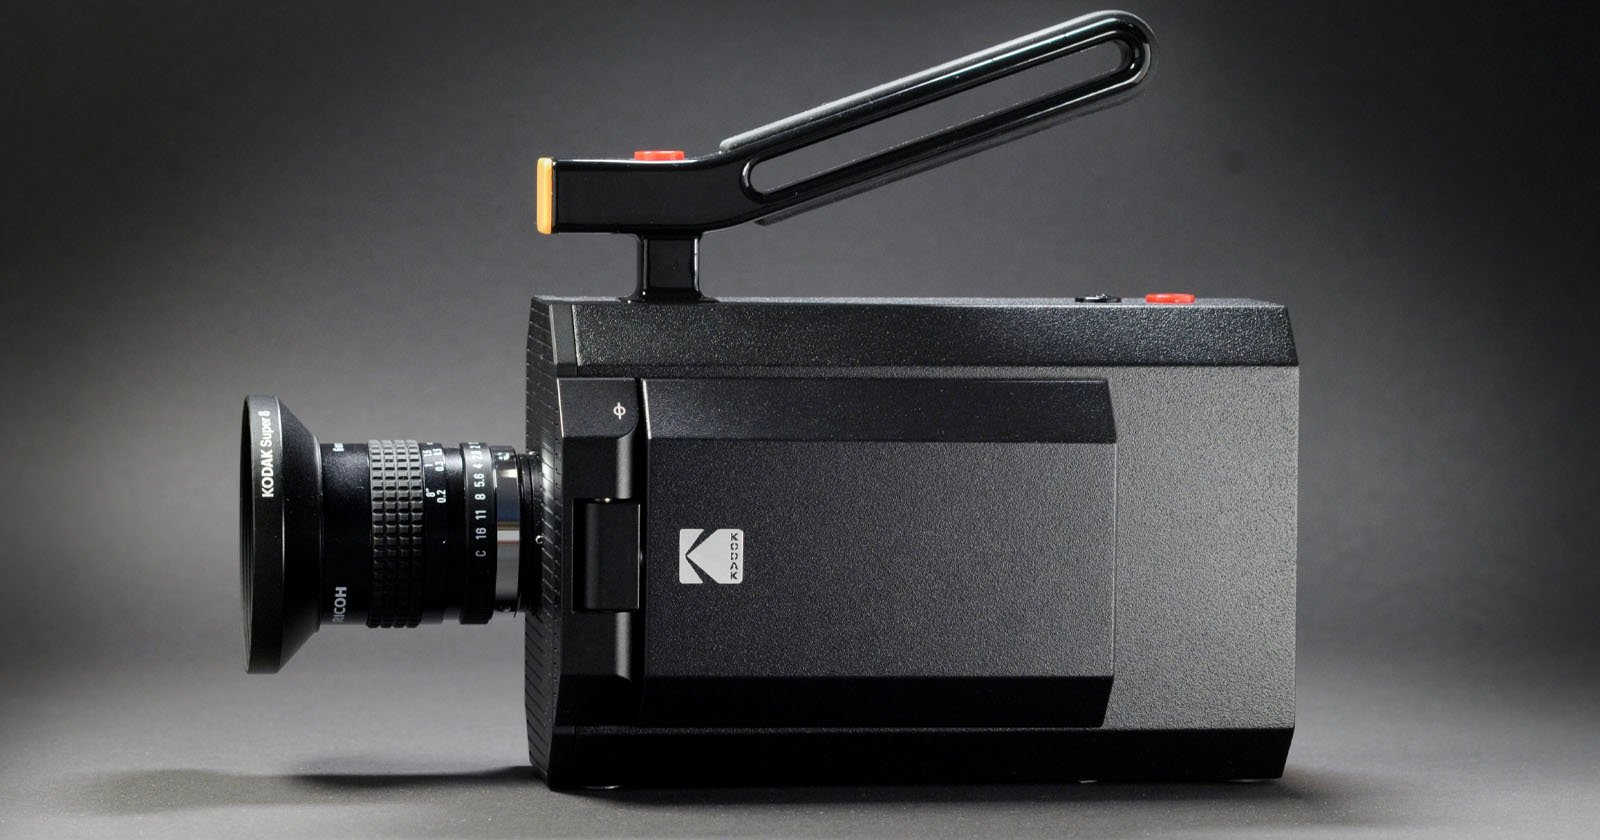 An Excellent Breakdown and What to Expect From Kodak’s New Super 8